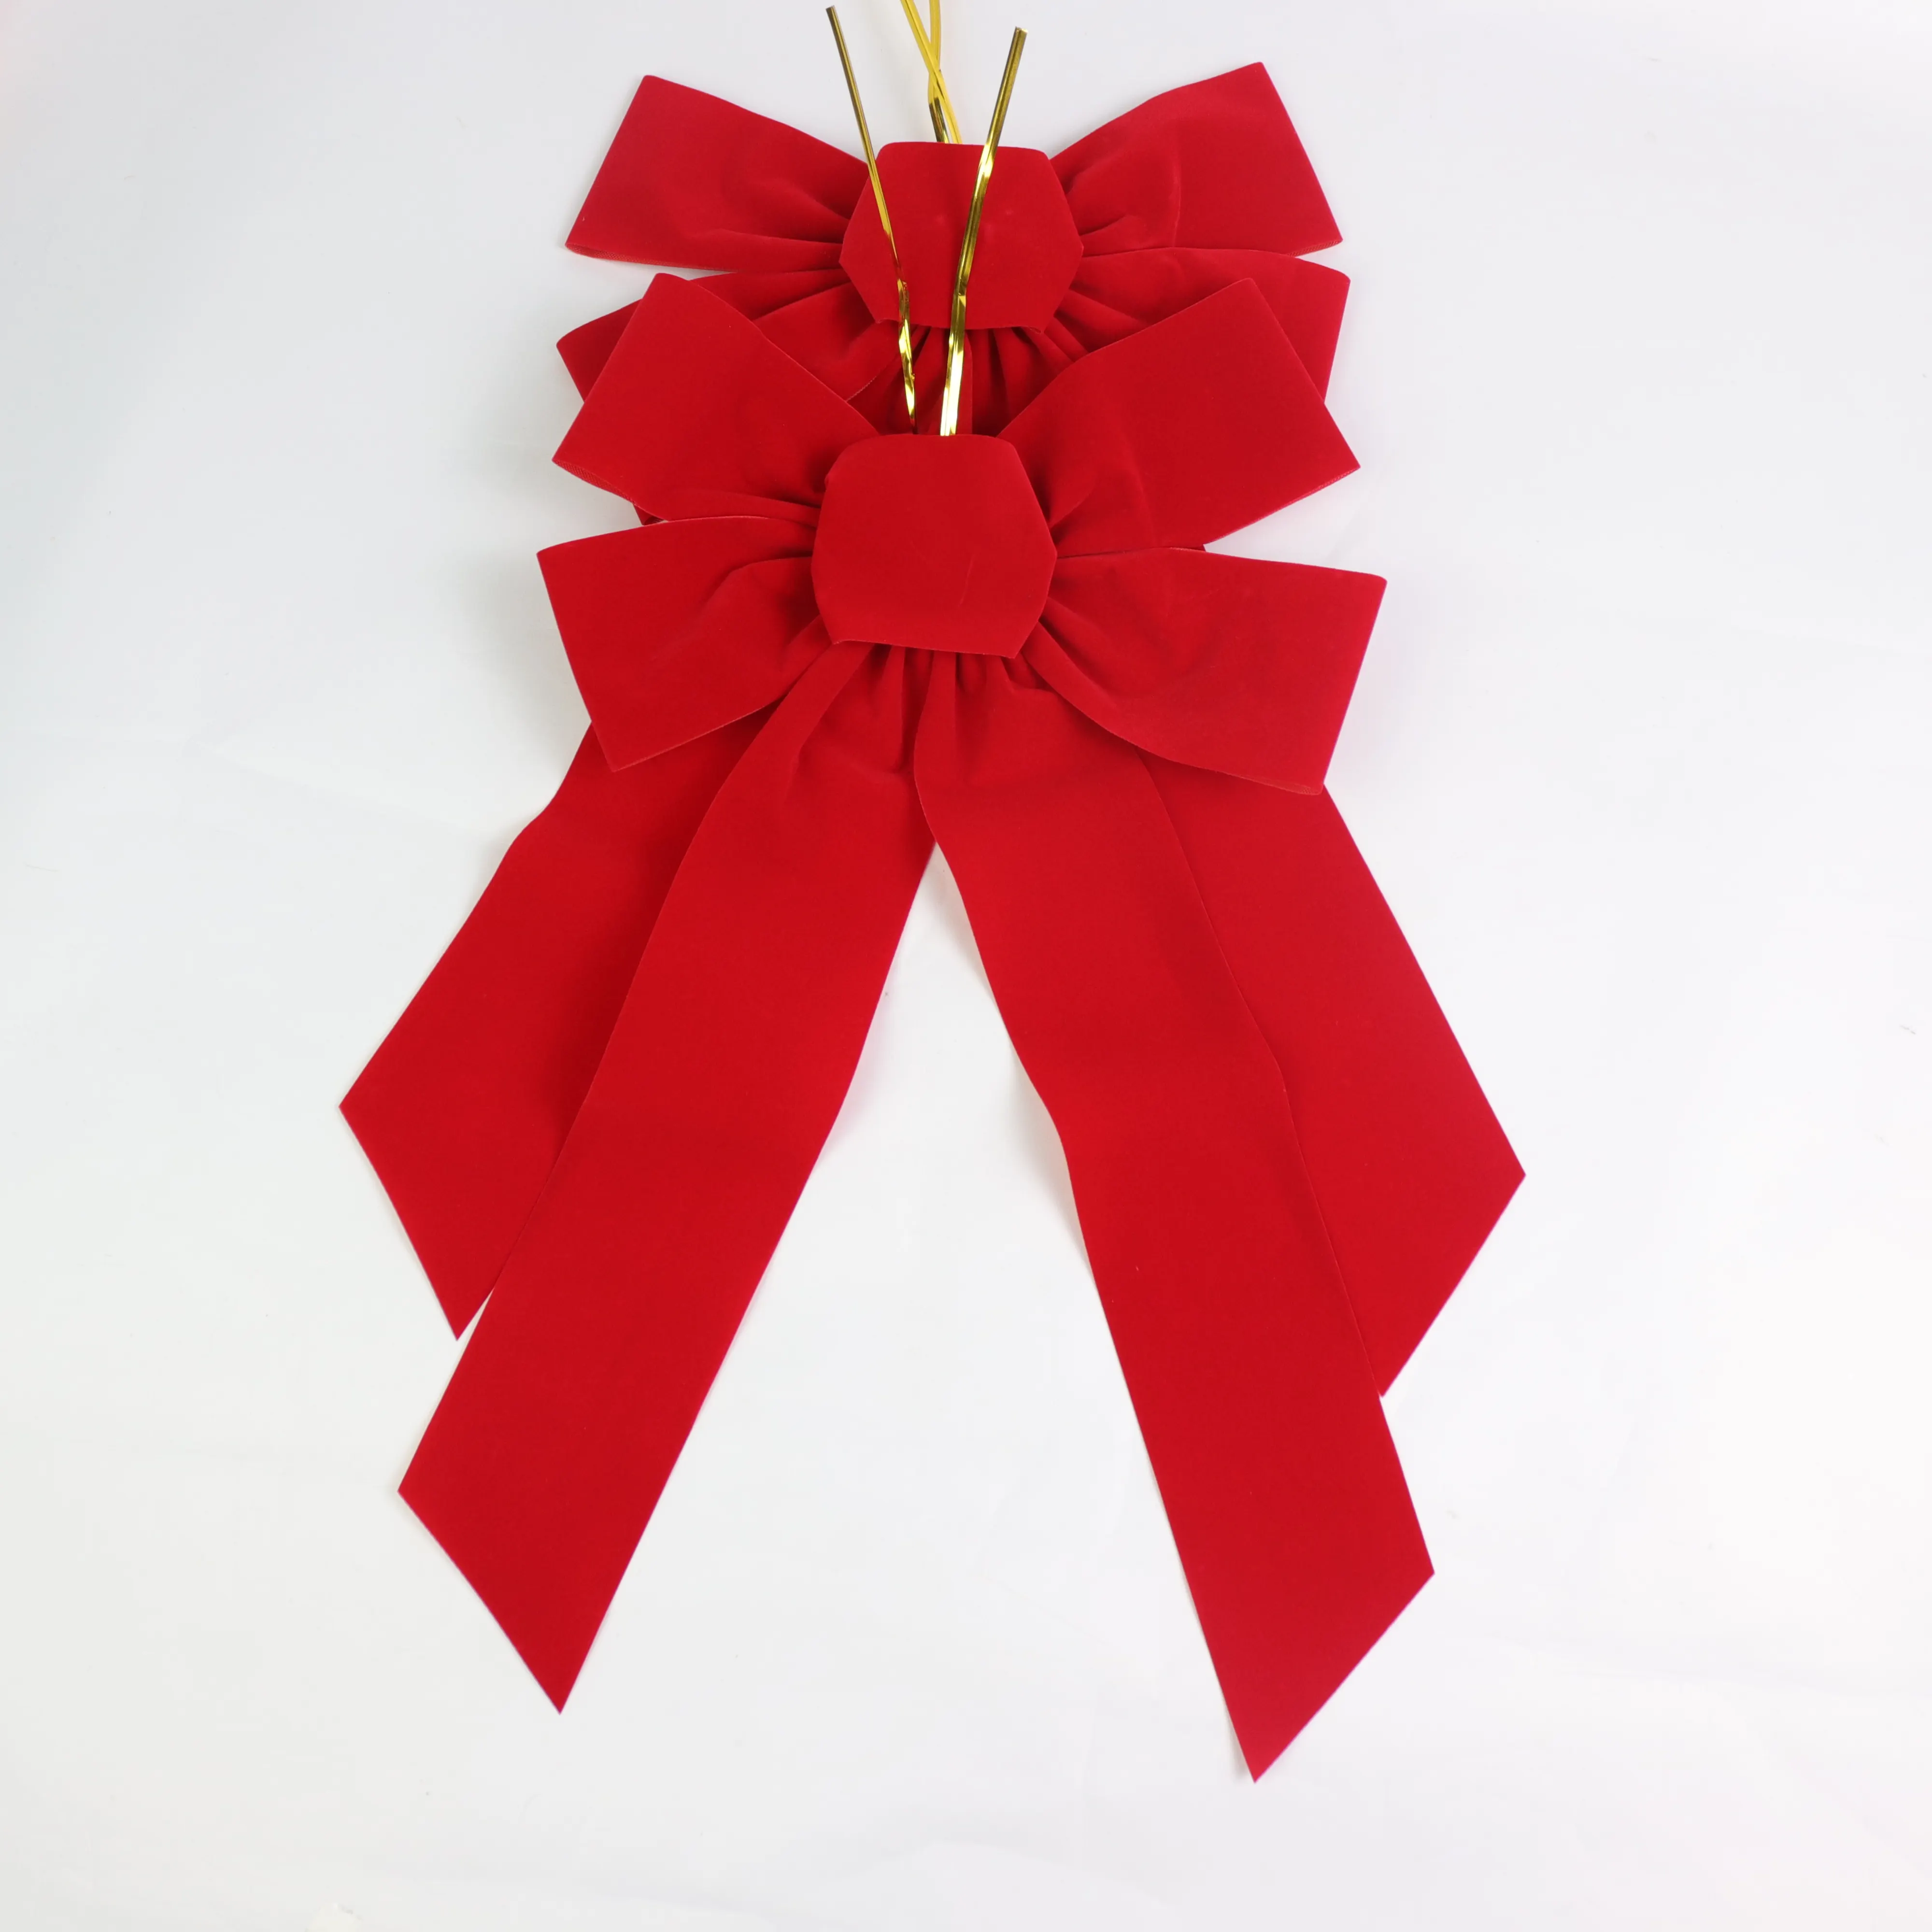 9(W)*16.5(H)" Christmas red velvet outdoor ribbon bow 10pcs/pack decorative bows custom for Xmas holiday tree decoration